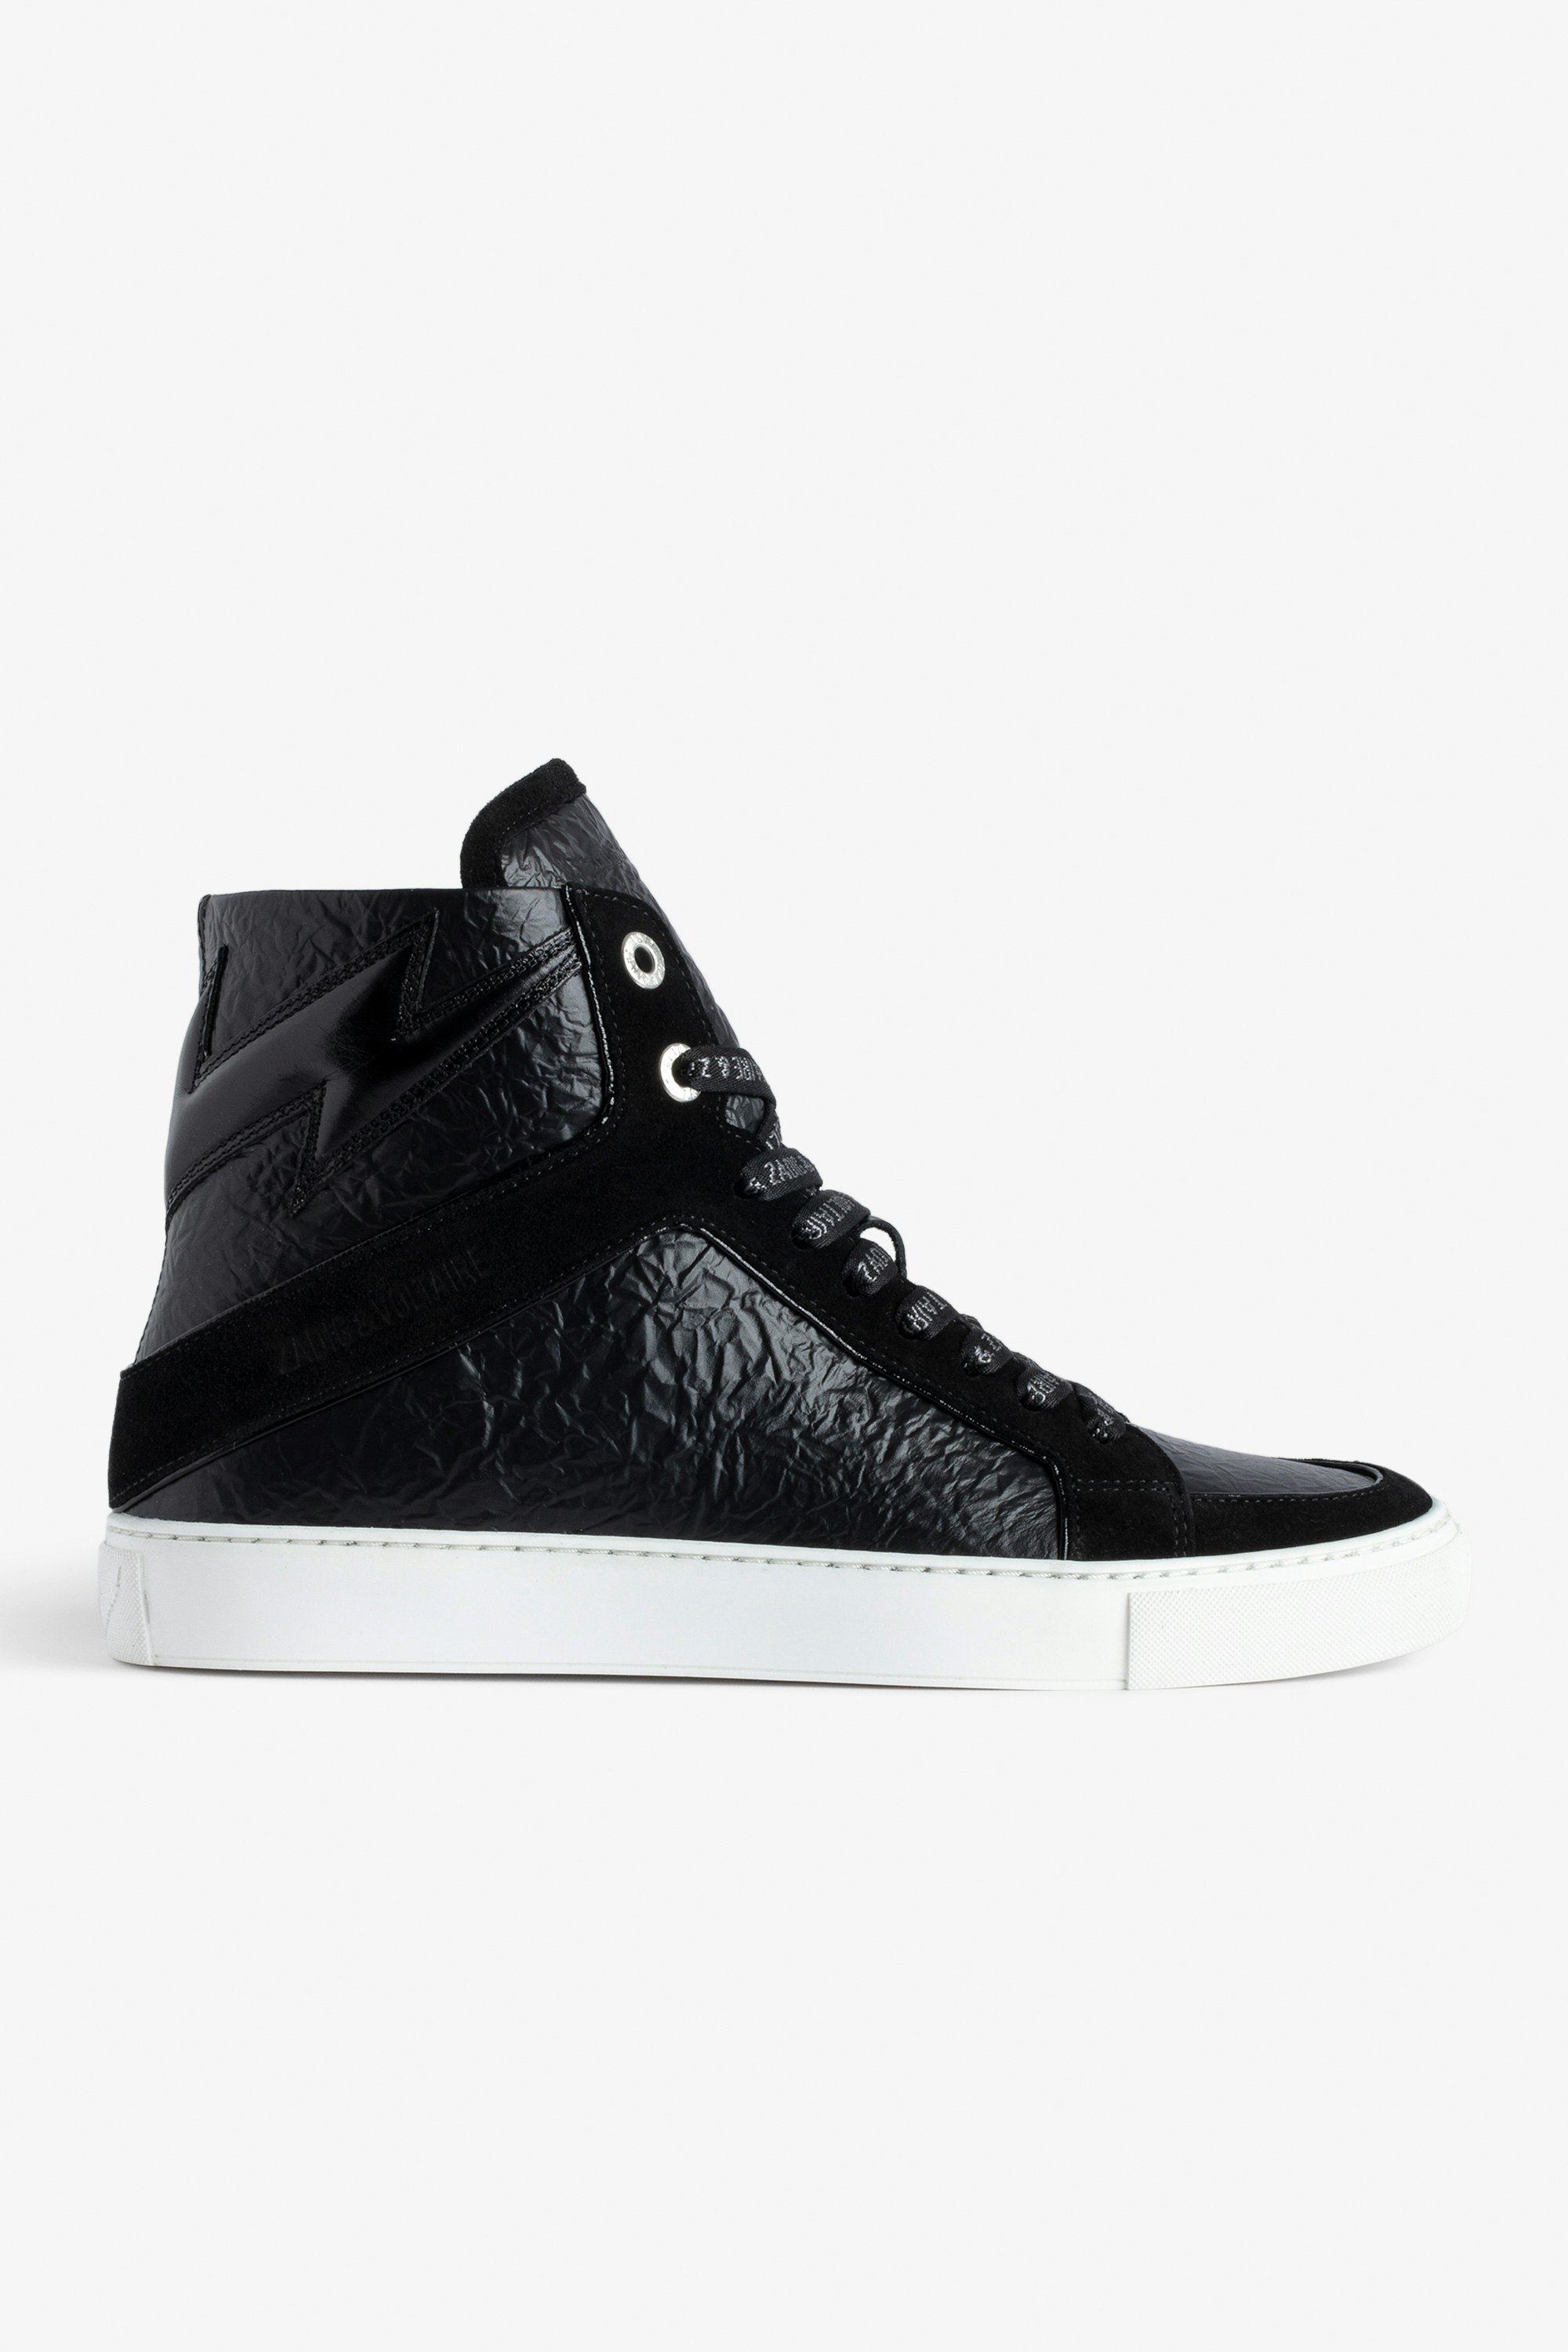 ZV1747 High Flash High-Top Trainers - Women’s black distressed leather high-top trainers with lightning bolt and suede panels.